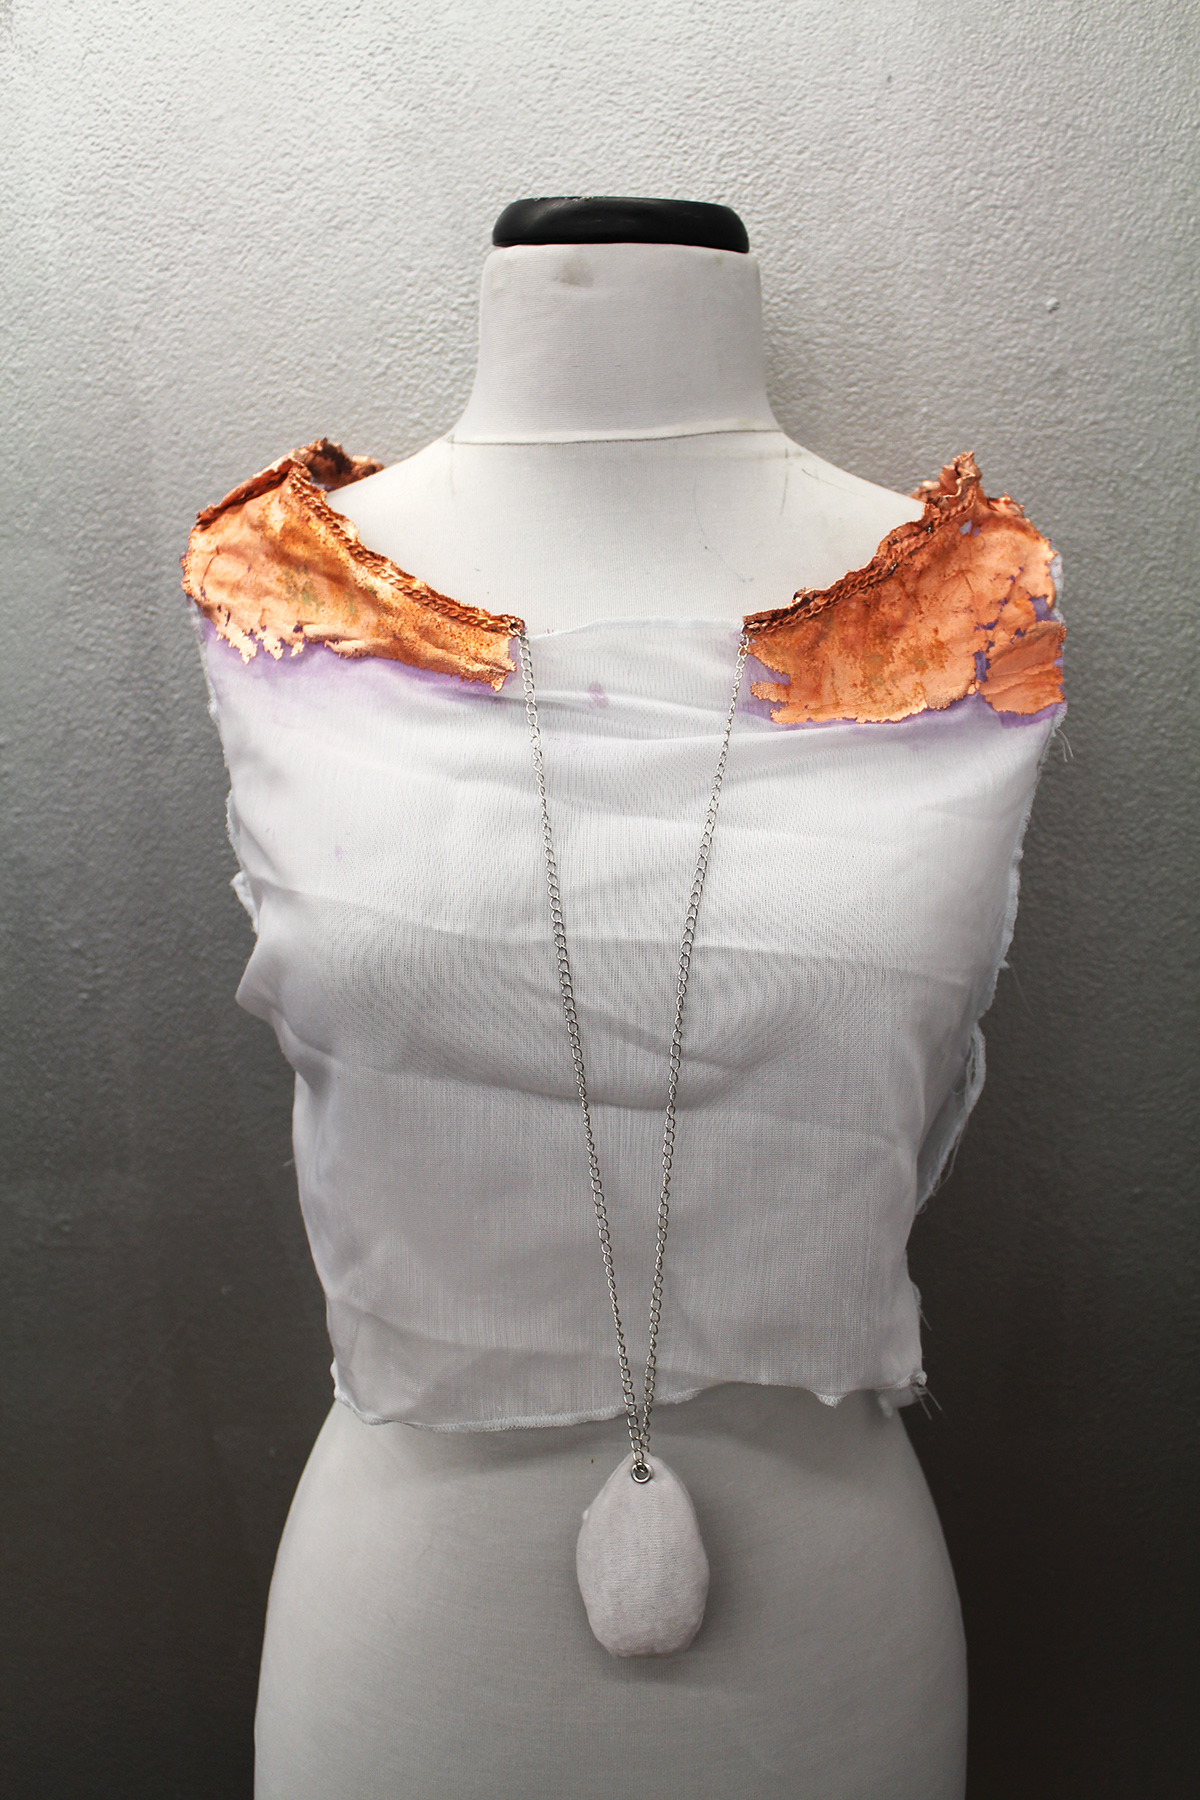 jewelry product fabric electroforming risd